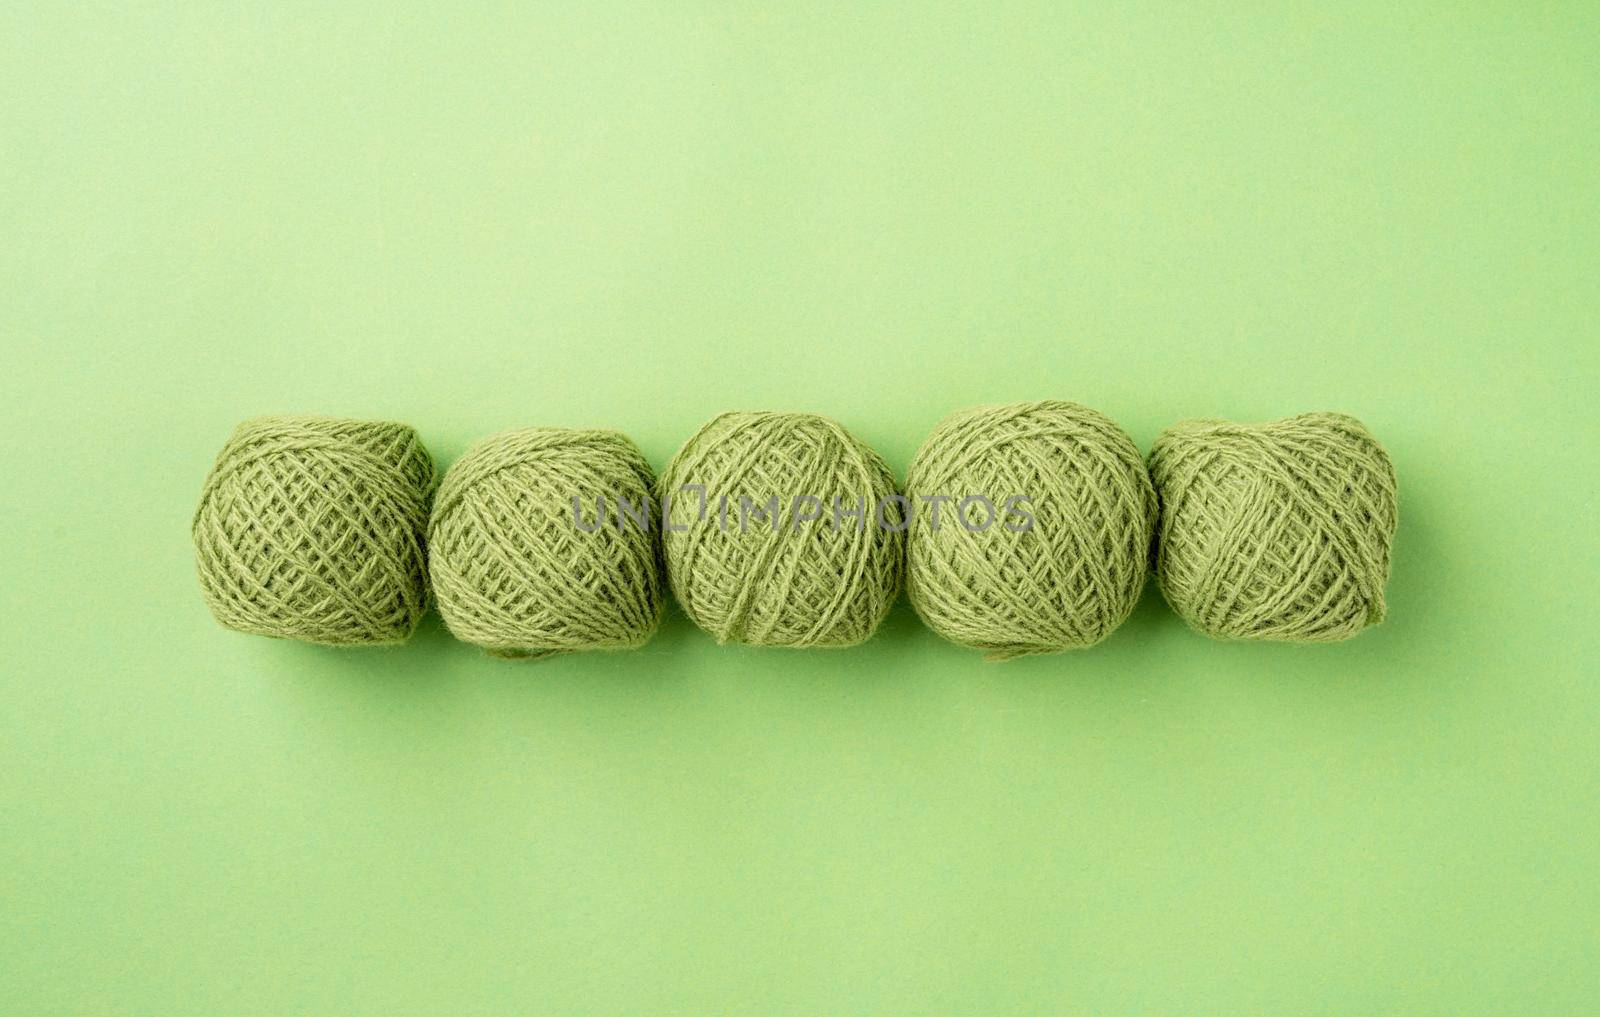 bright green yarn wool in a raw on bright background, top view flat lay by Desperada